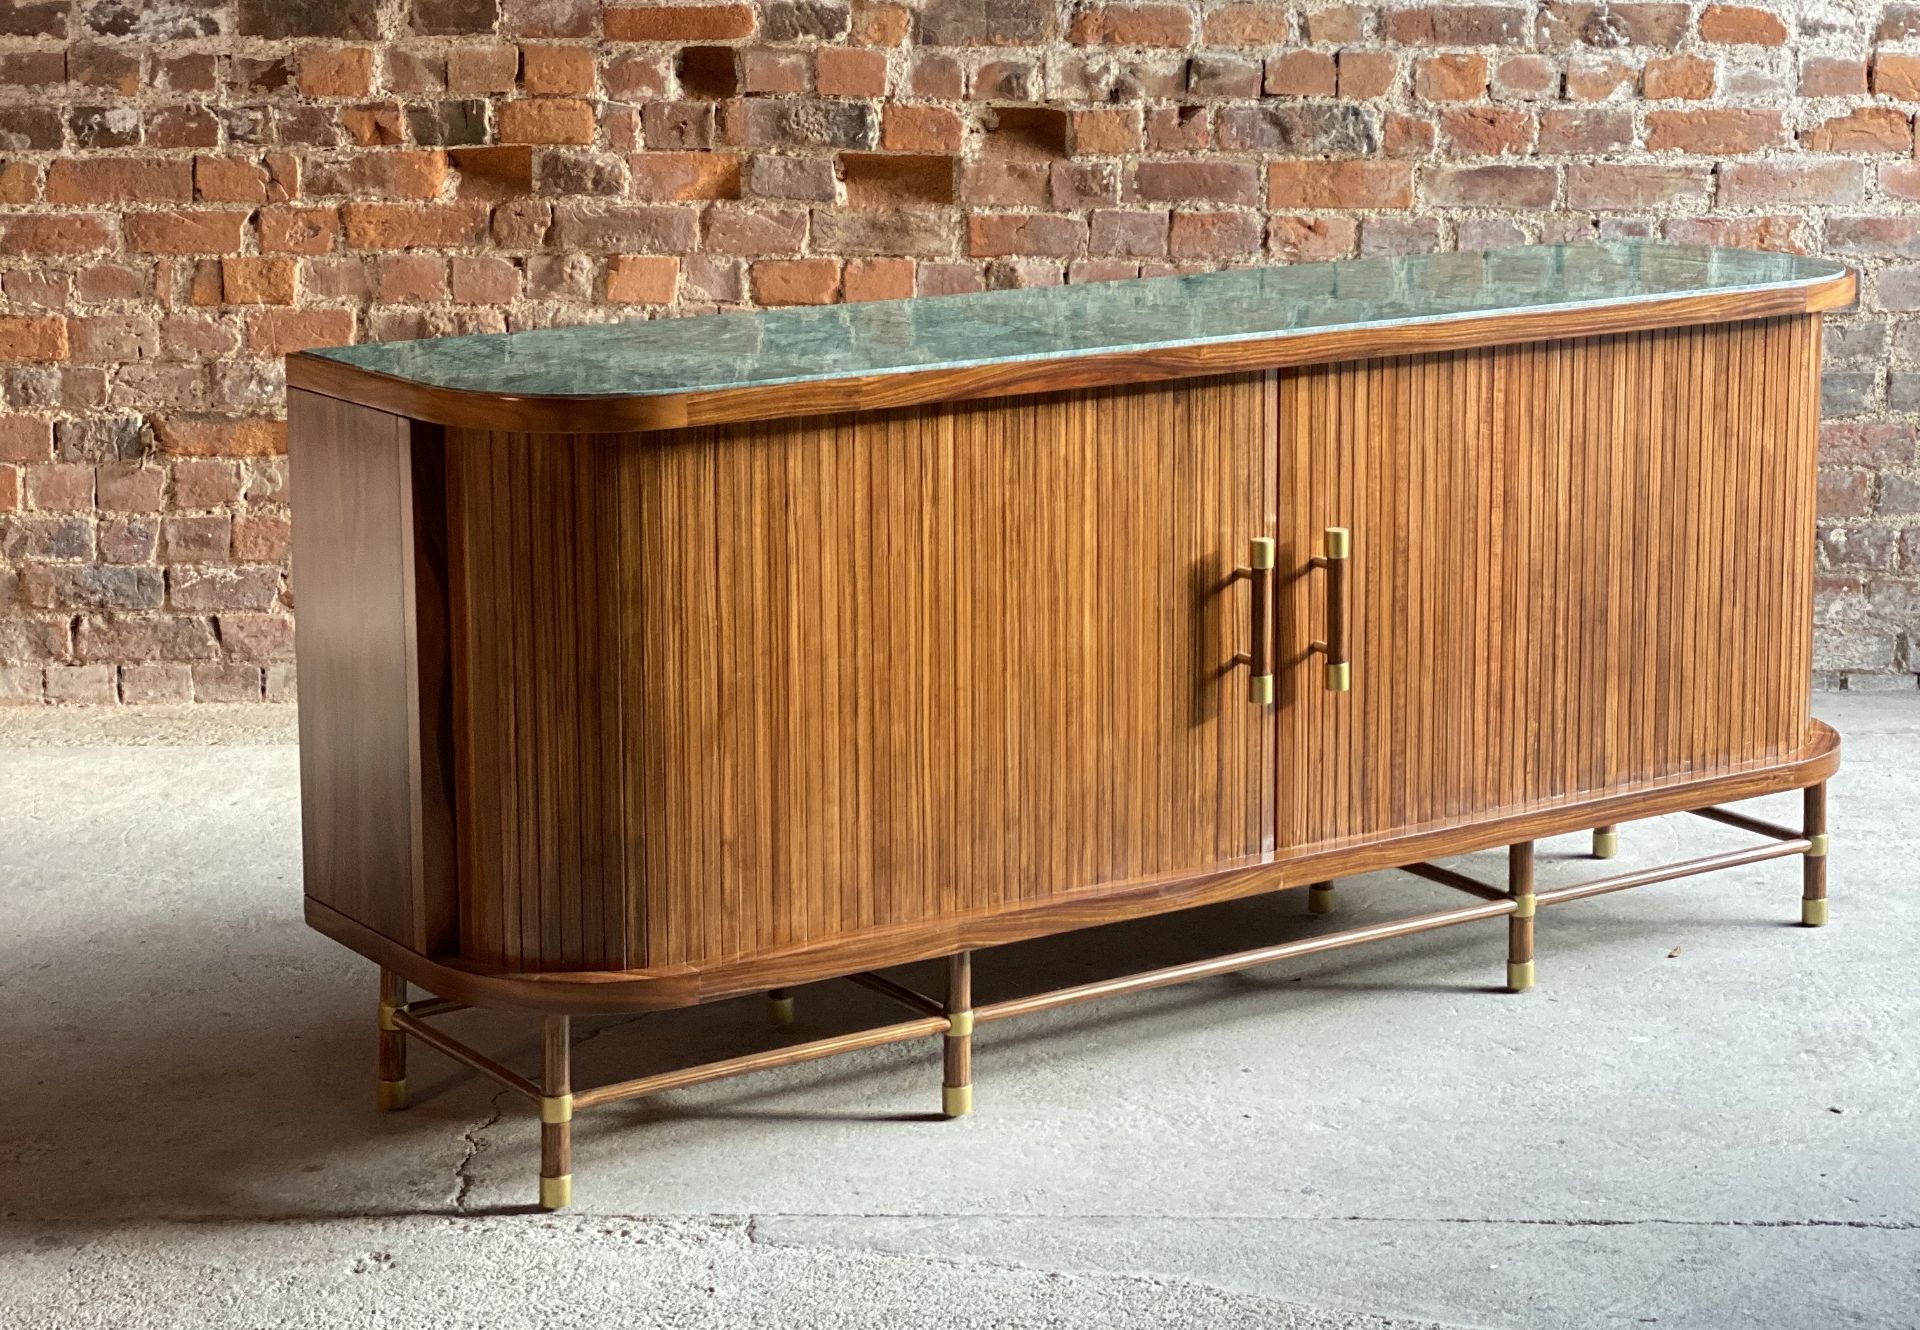 Deluxe Credenza Inspired By The Timeless Beauty Of Vintage Finds This Luxe Eclectic Credenza Has - Image 2 of 3